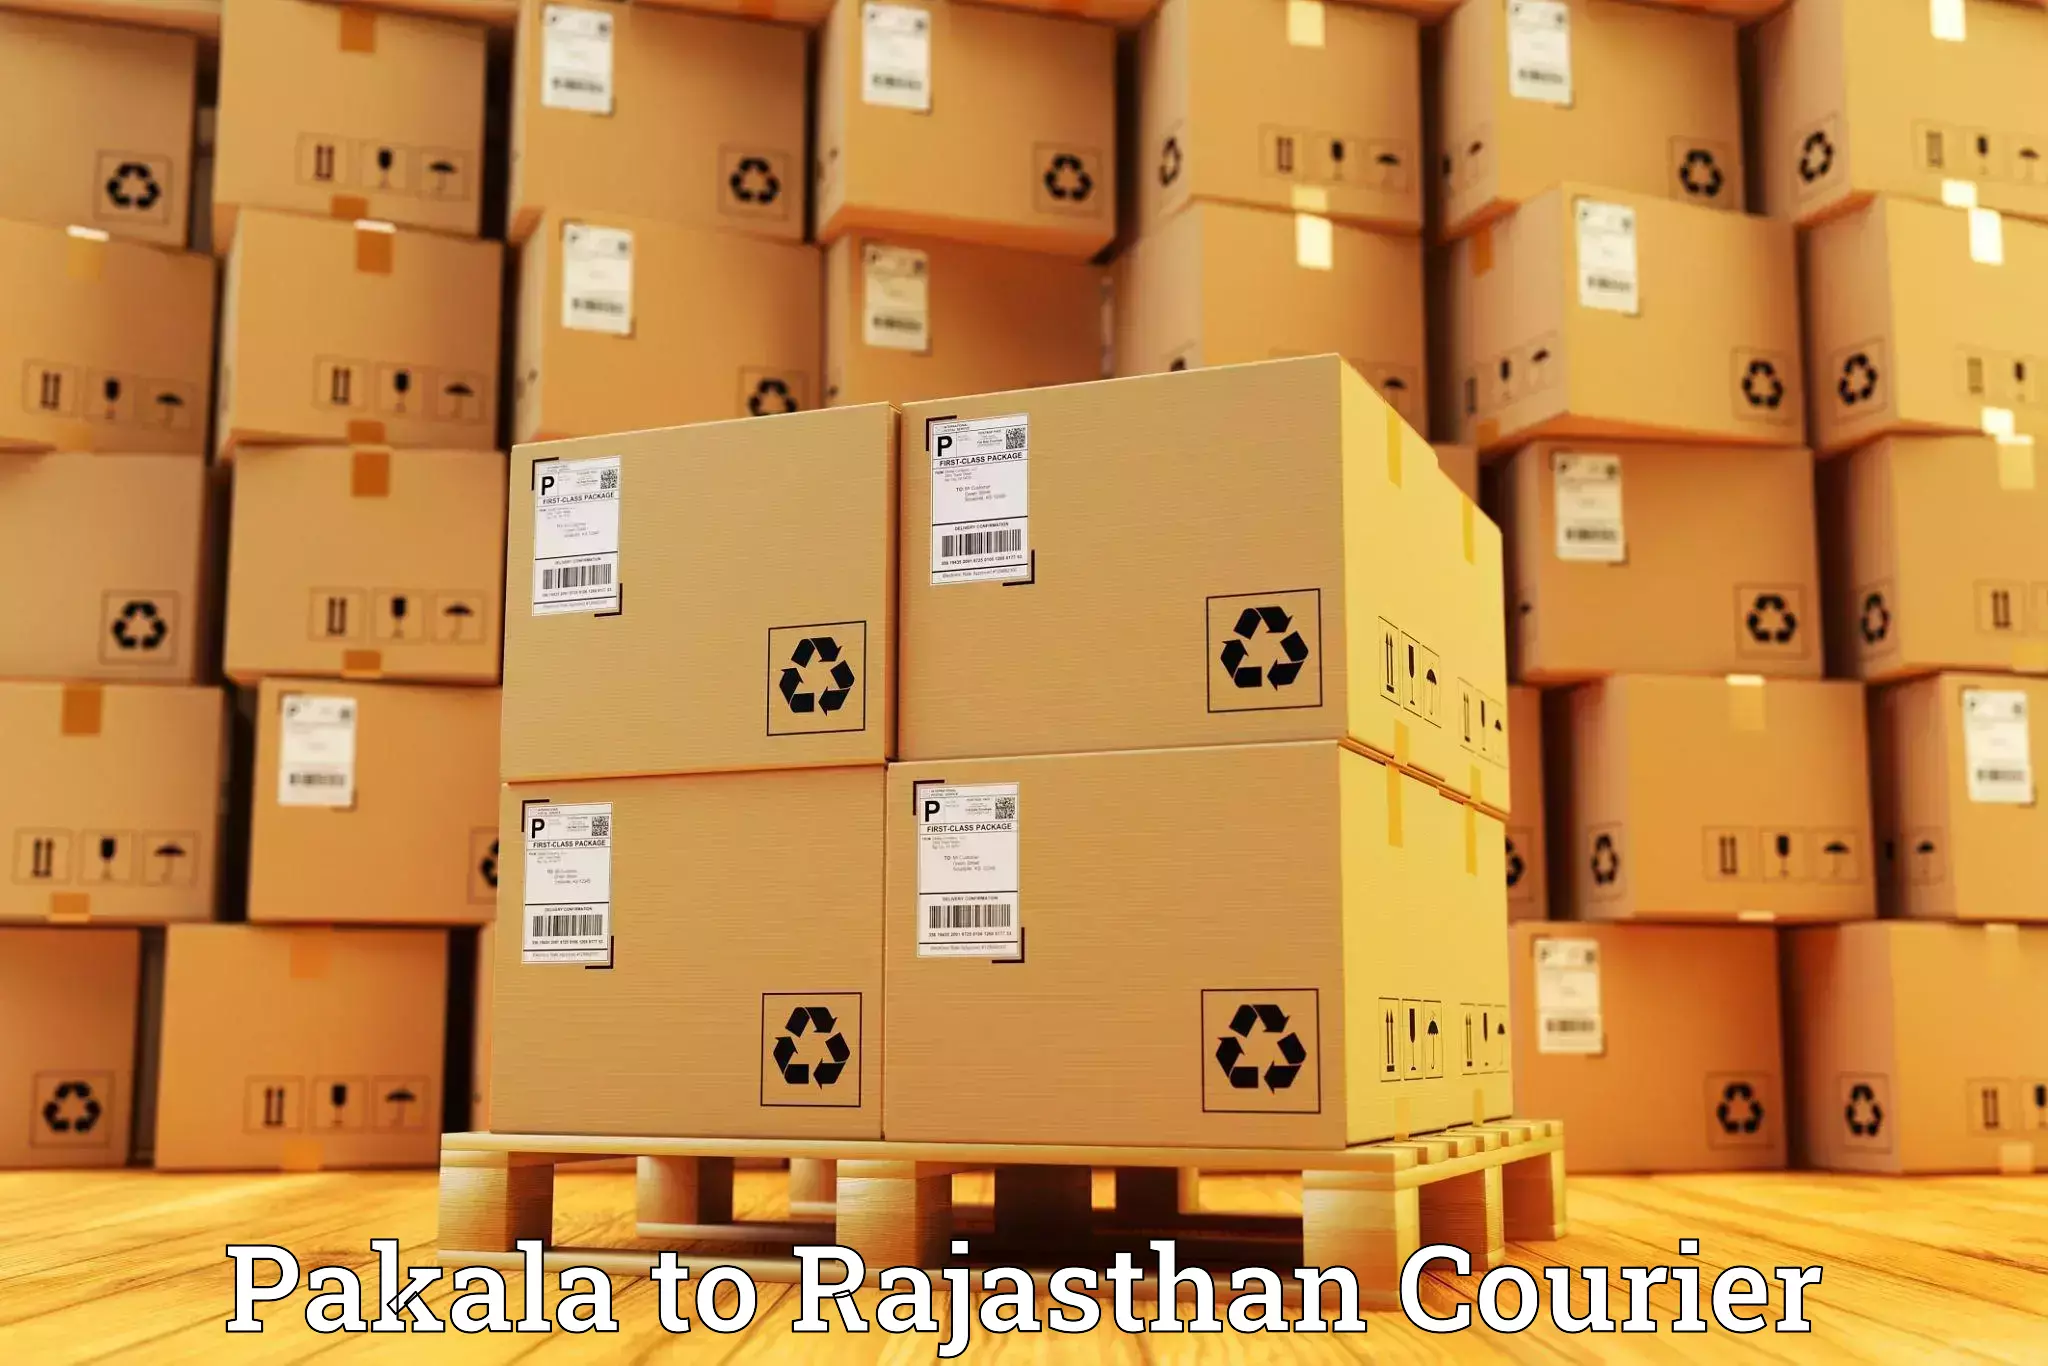 Courier service comparison Pakala to Yeswanthapur